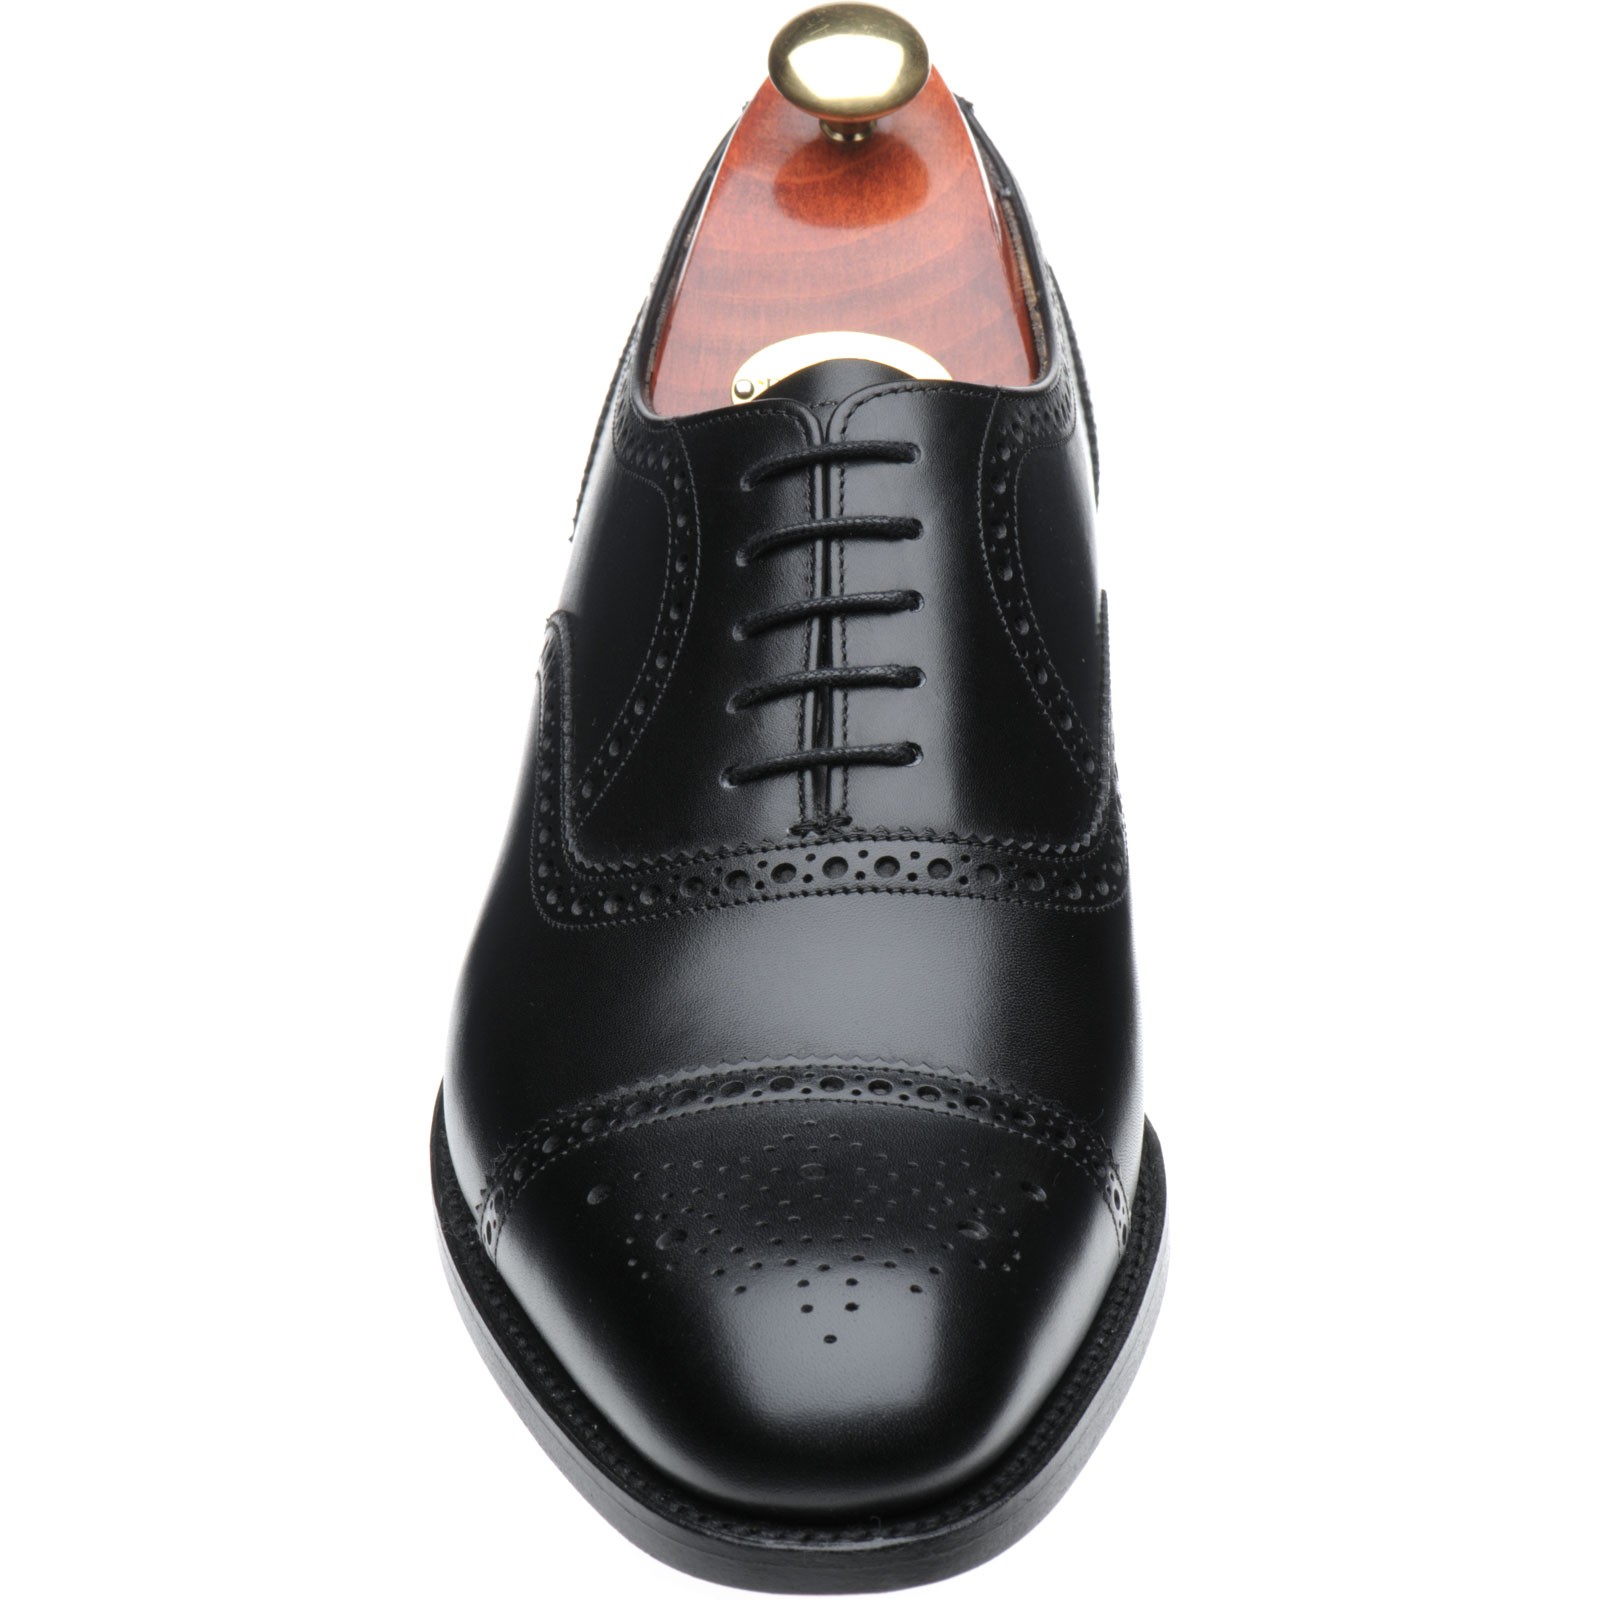 Barker shoes | Barker Professional | Mirfield in Black Calf at Herring ...